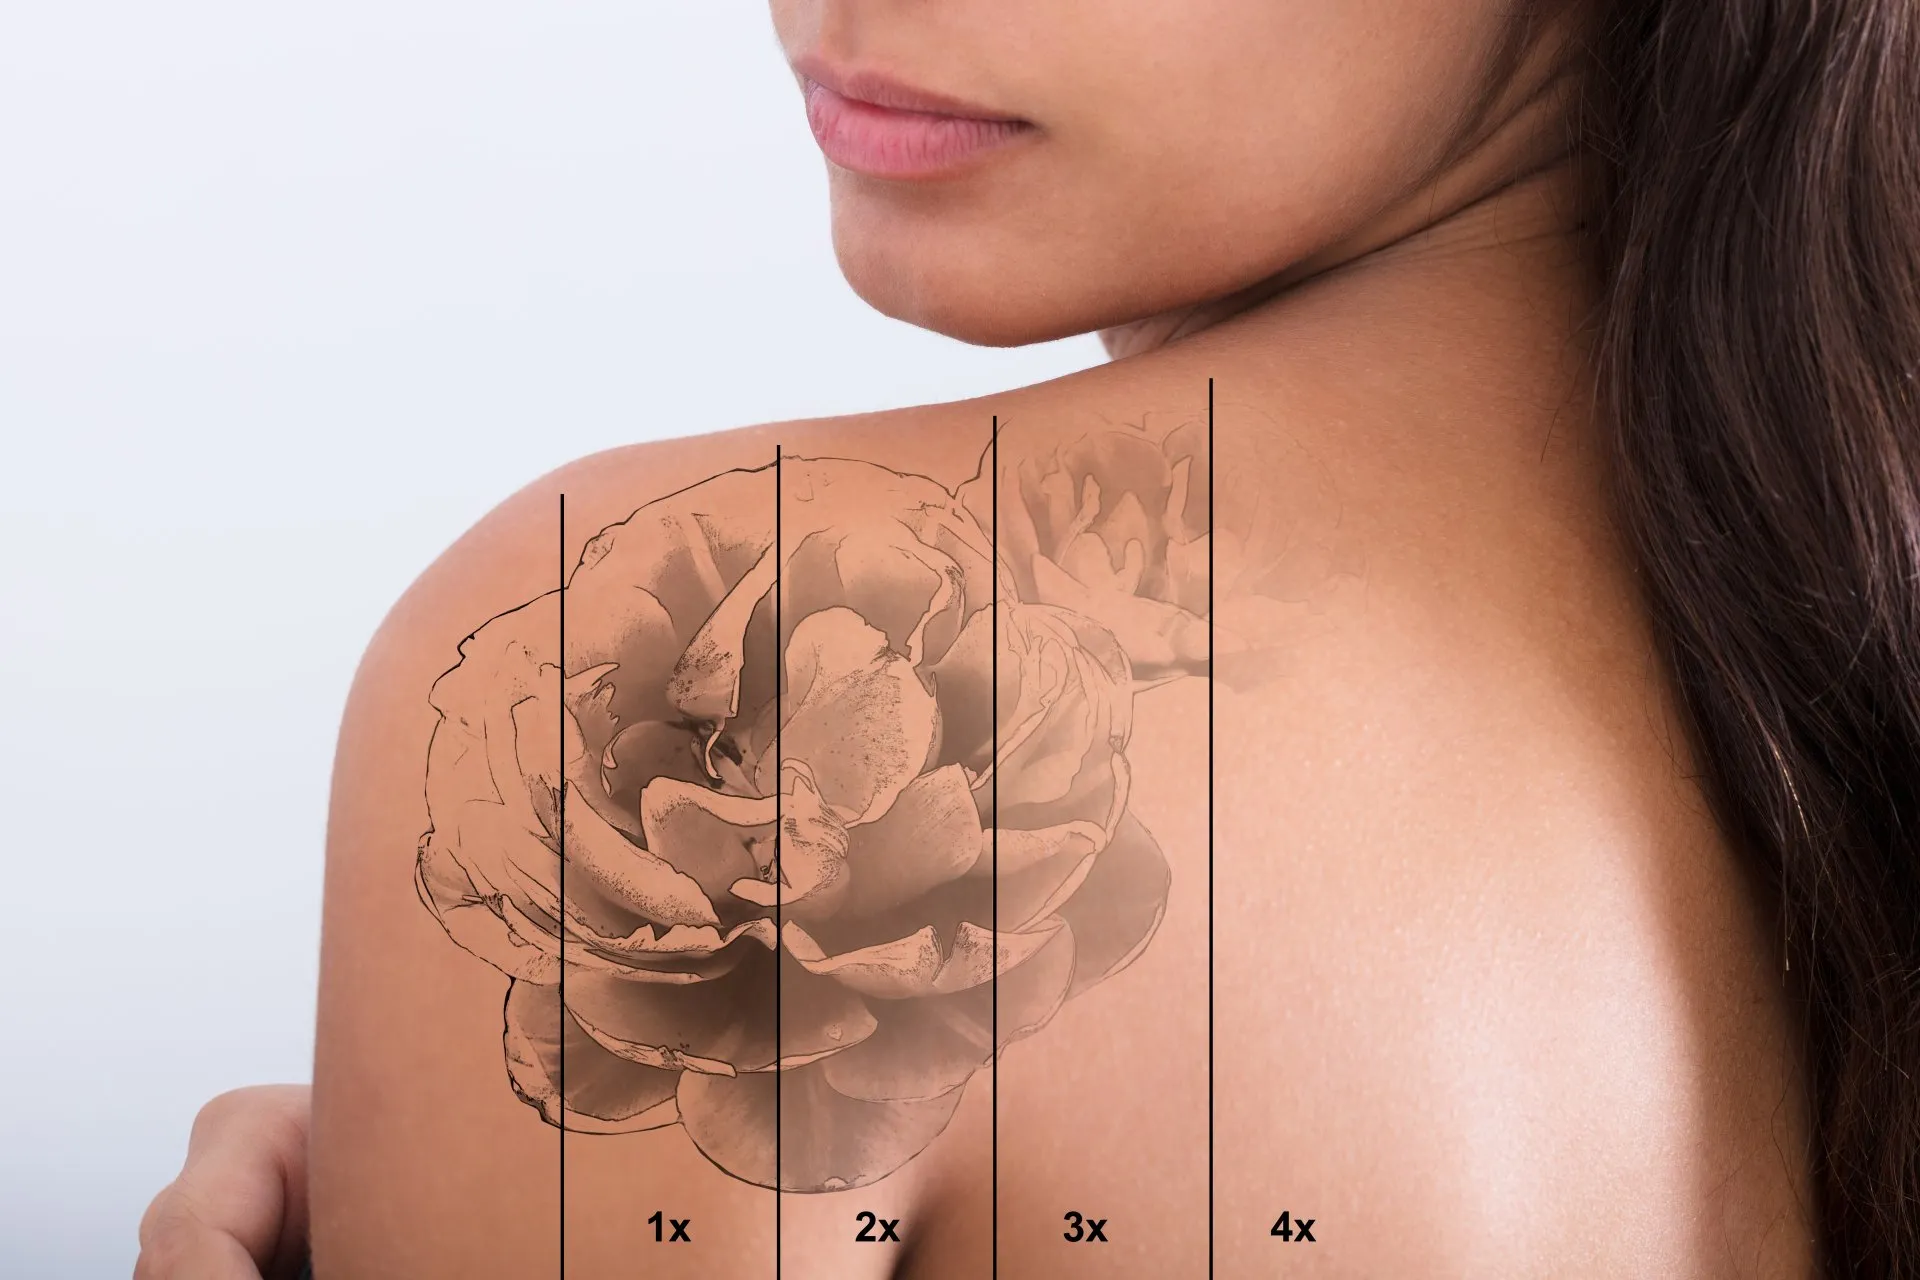 Woman with large rose tattoo on shoulder - Laser Tattoo Removal - Laser treatments & microneedling - Skinsolutions Wellness & Aesthetics - Medspa Hendersonville, TN